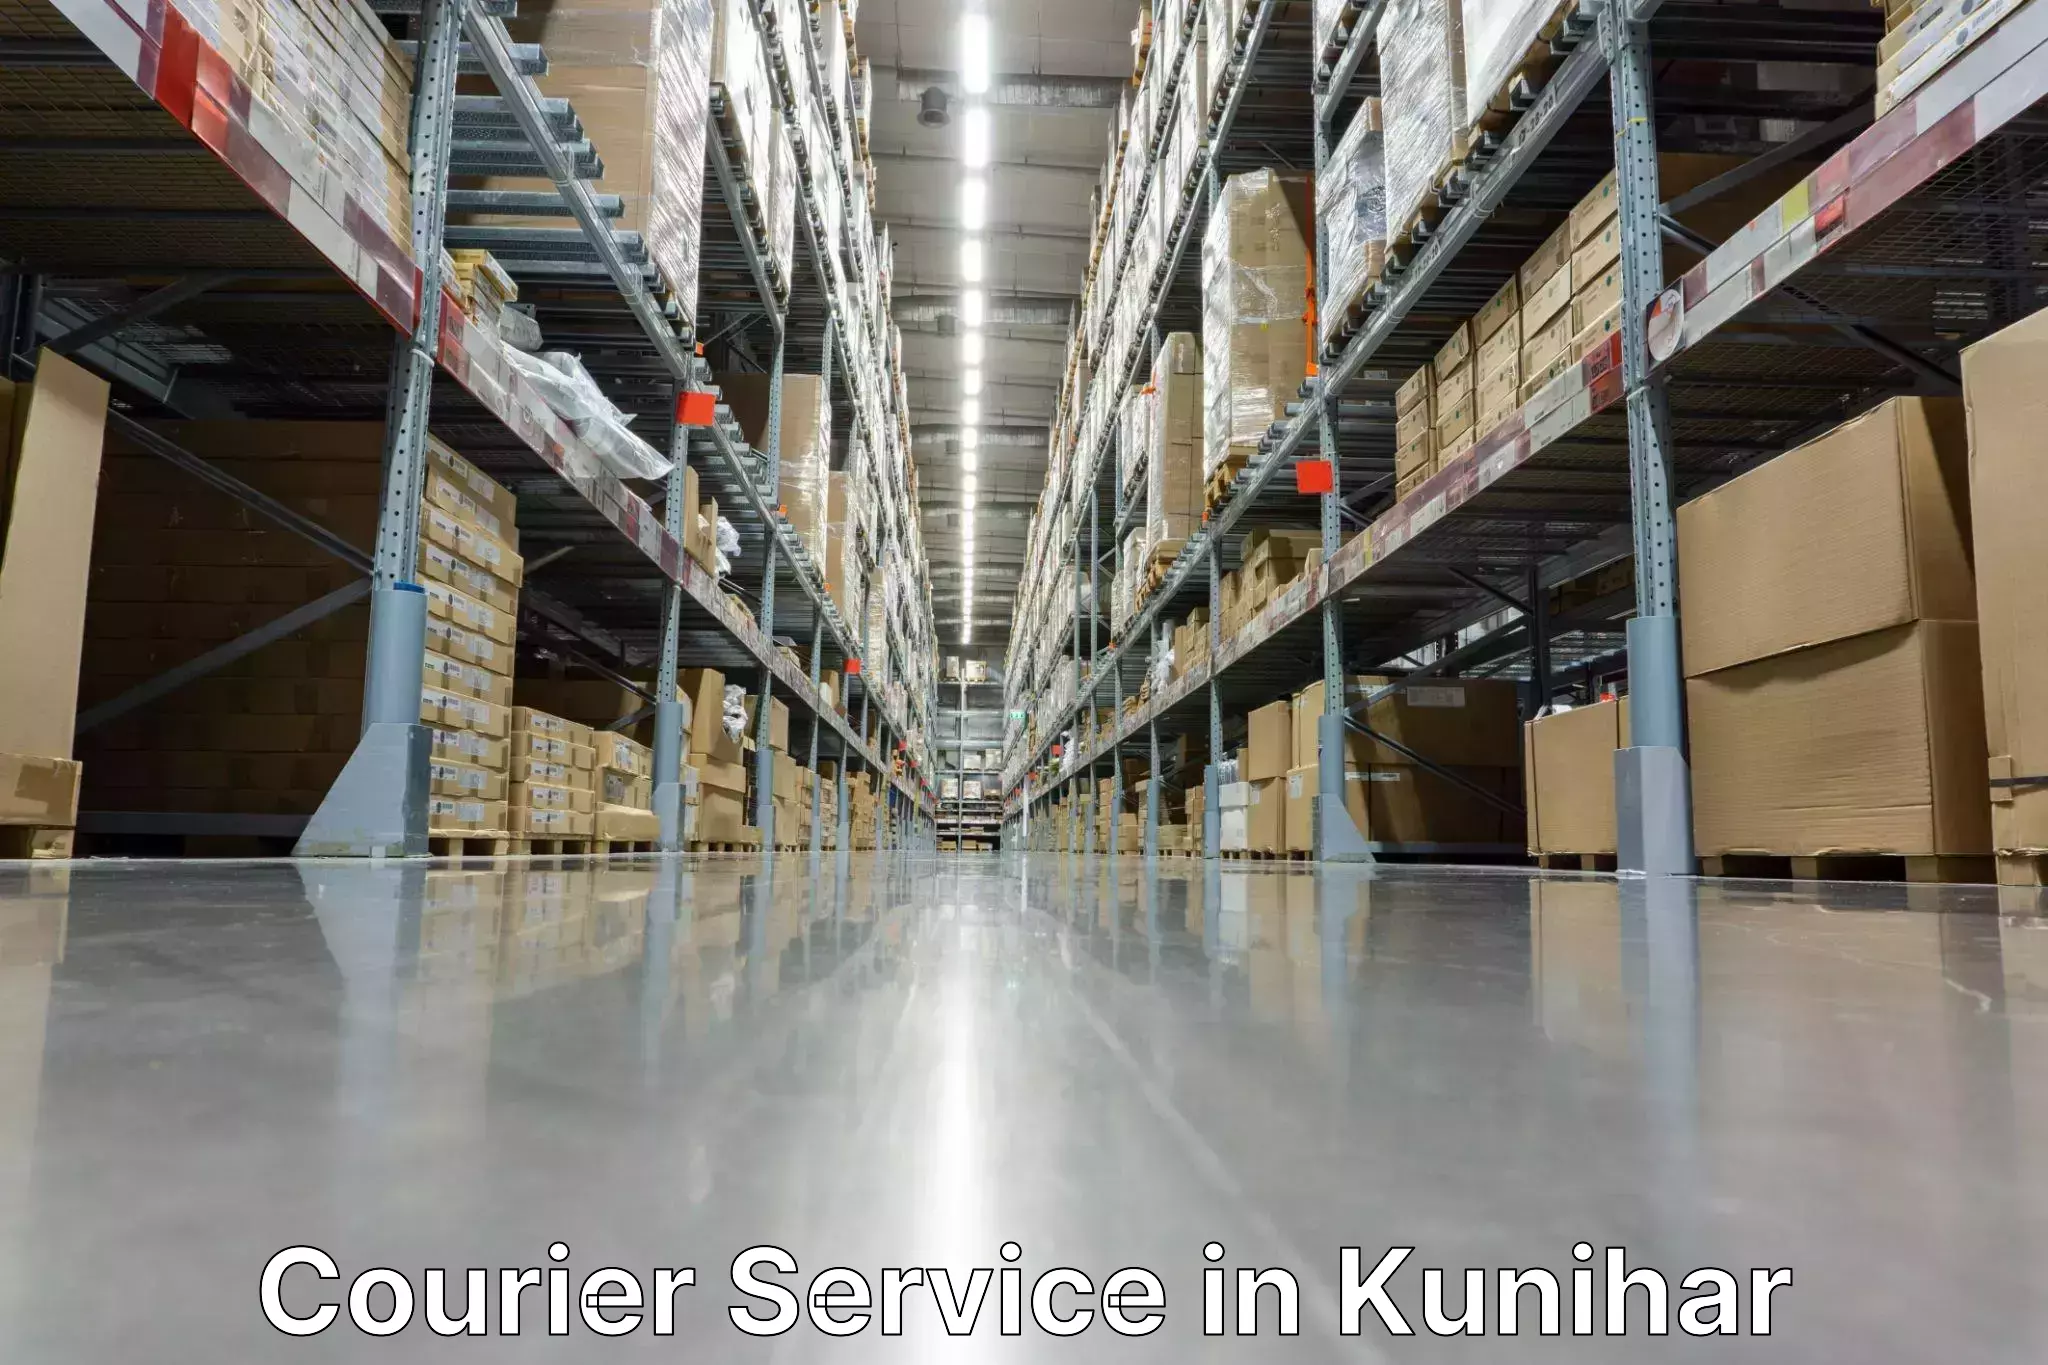 24-hour delivery options in Kunihar